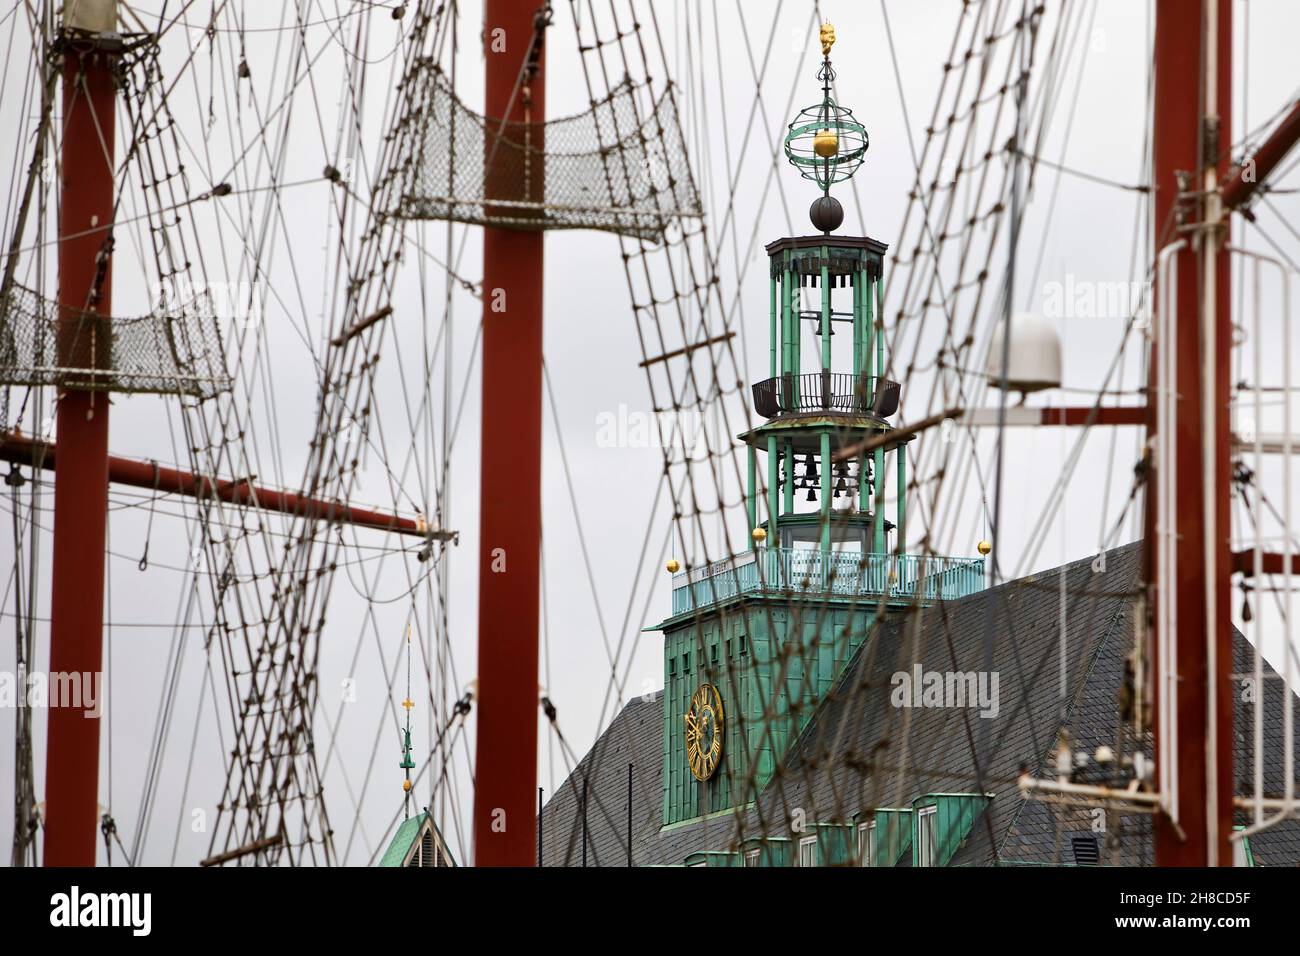 masts of sailing ship Heureka in front of Ostfriesisches Landesmuseum, Germany, Lower Saxony, East Frisia, Emden Stock Photo